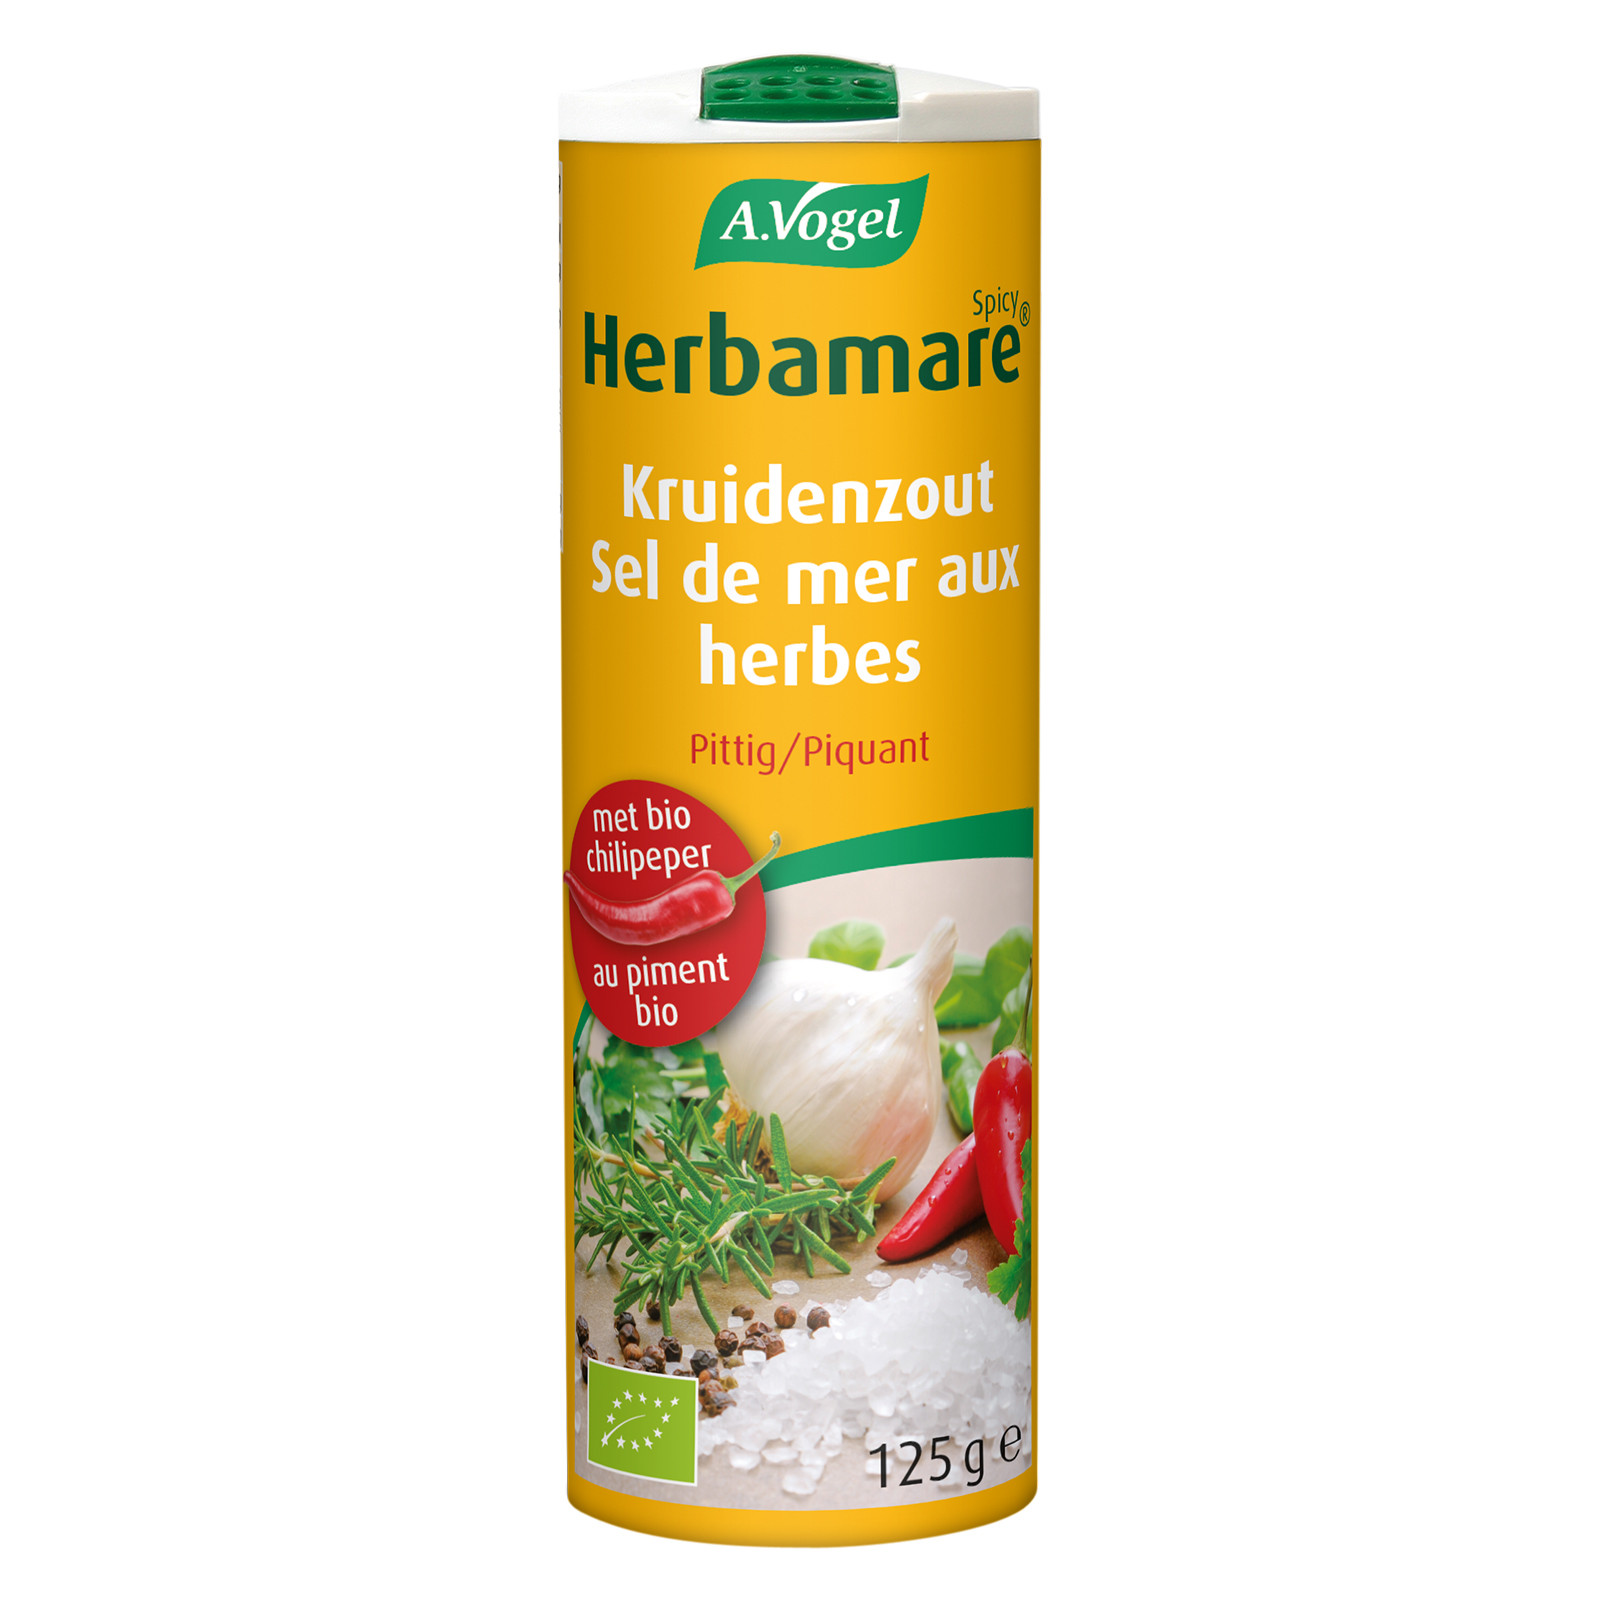 A.Vogel Herbamare Spicy Kruidenzout